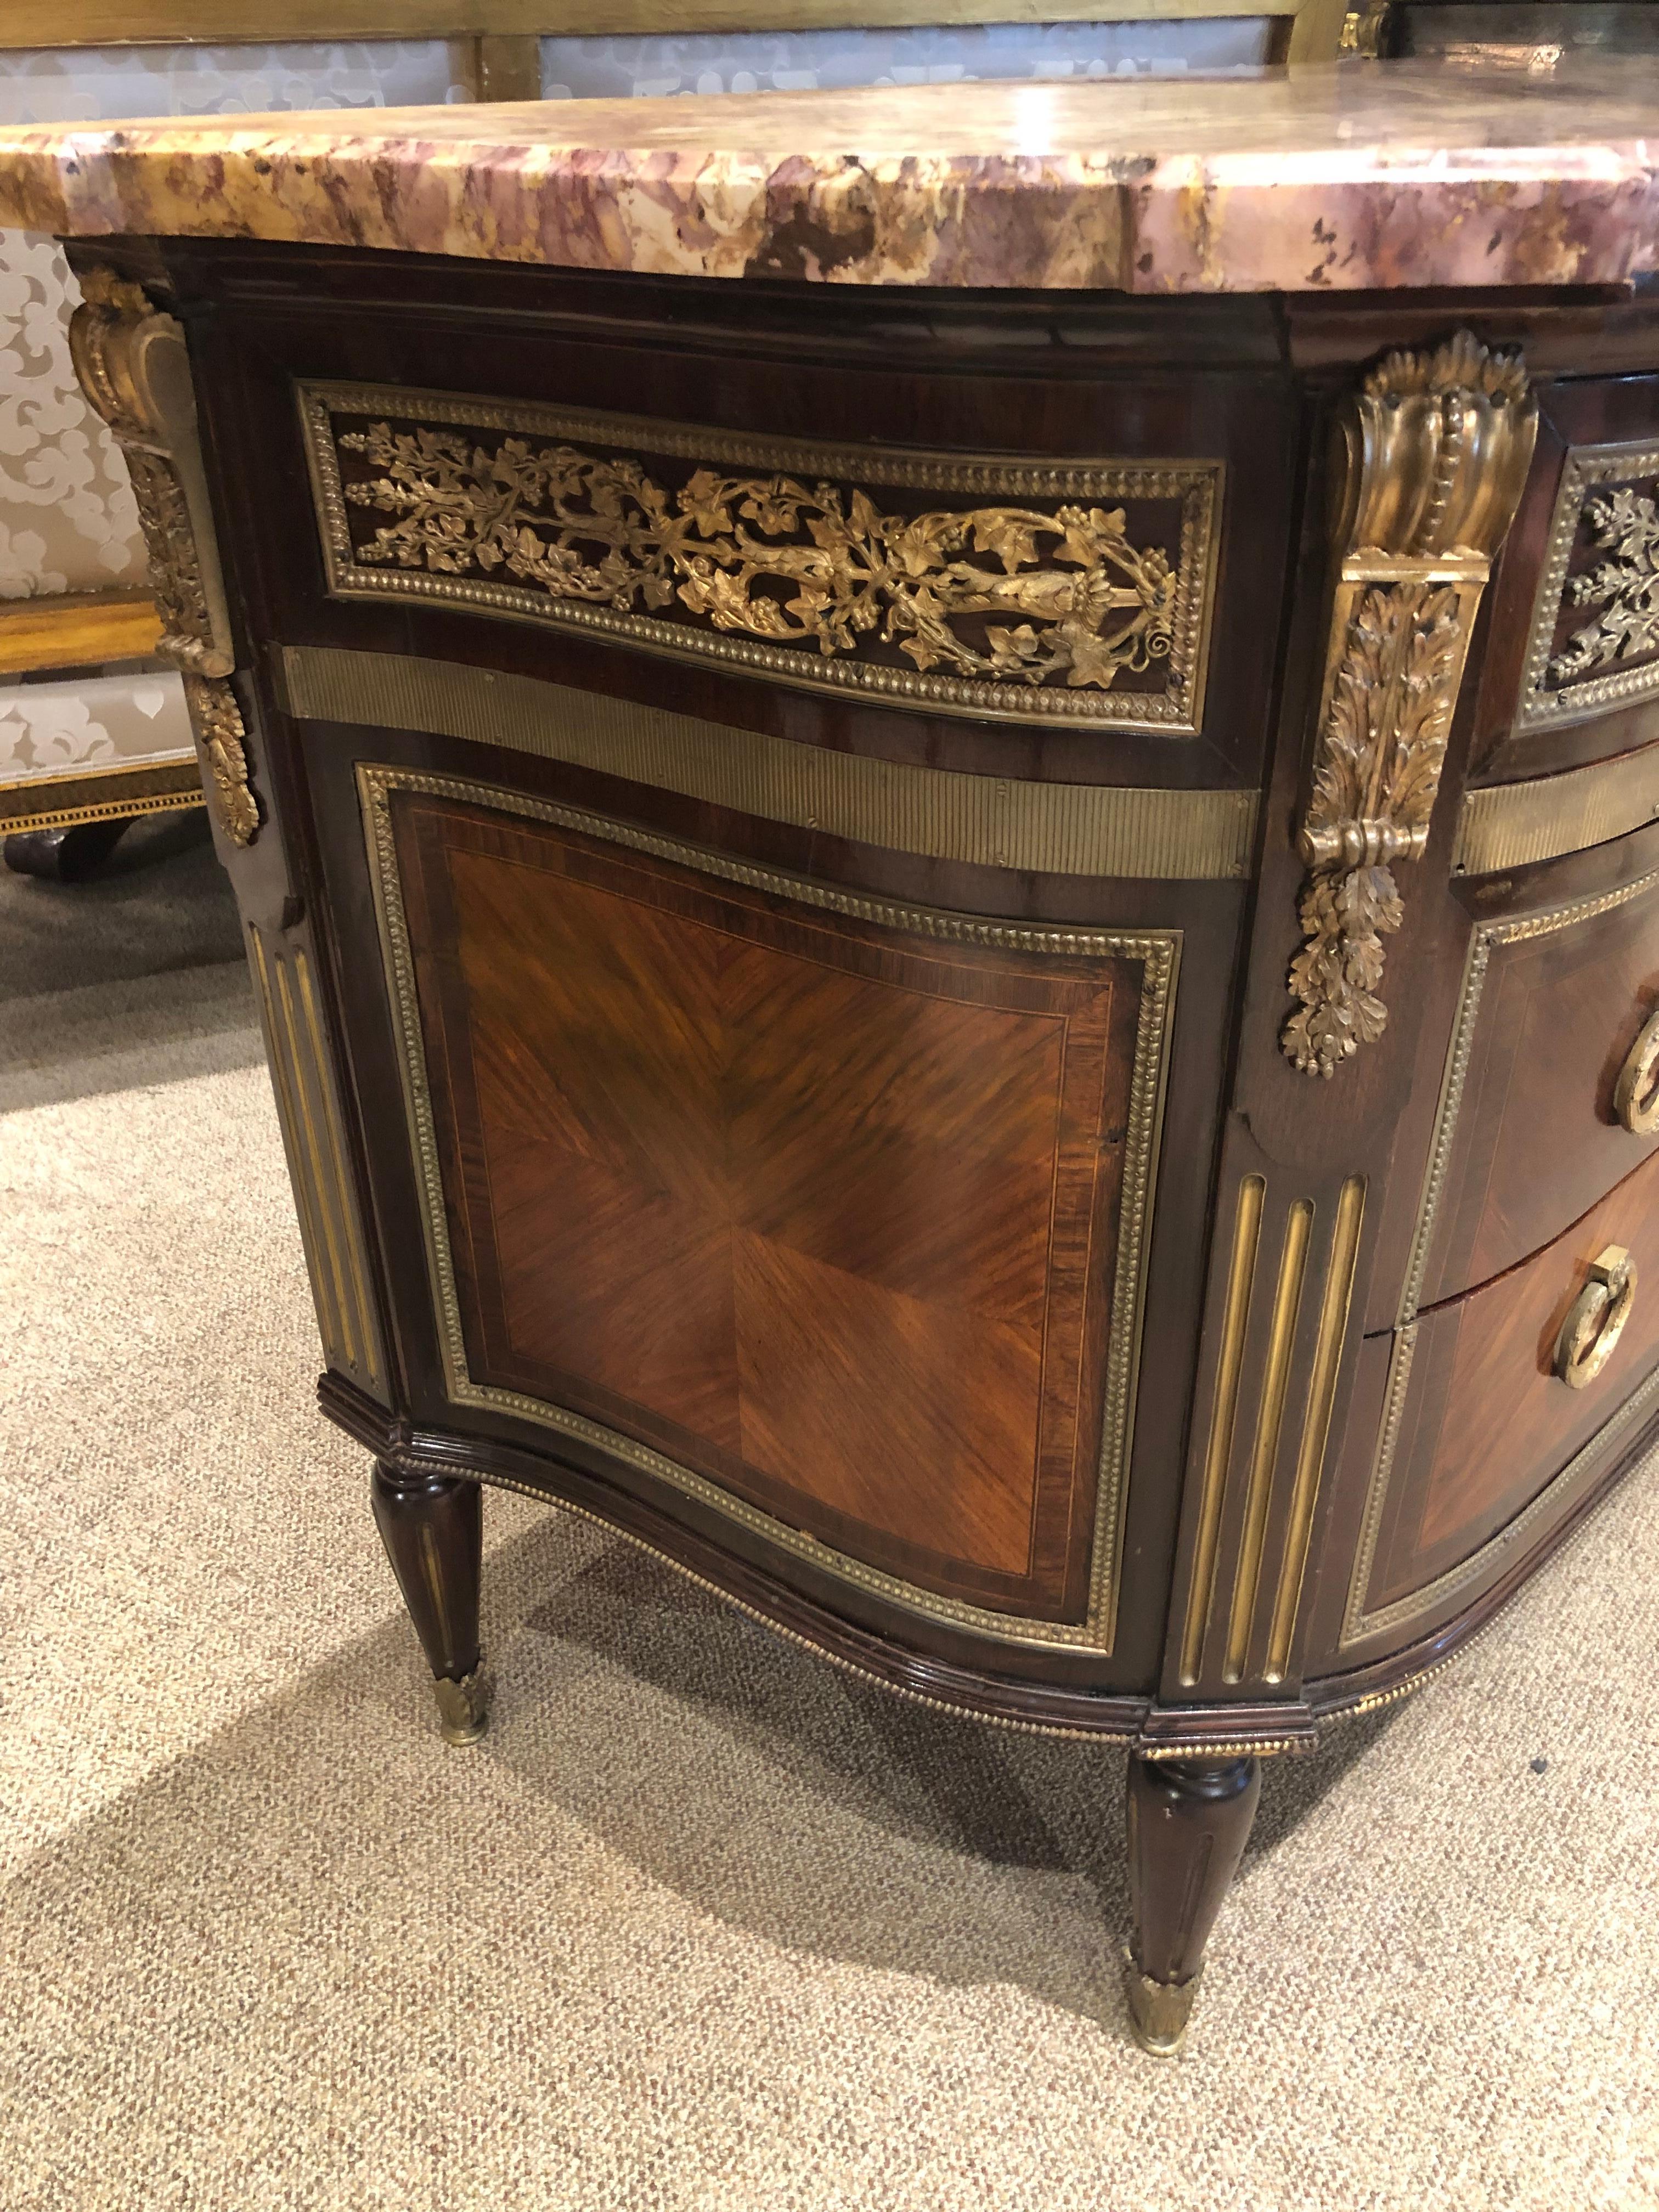 Louis XVI style gilt bronze mounted commode 19th century marble top of breakfront form having three drawers
with working key. The bronze mounts depict leaf
and berry design. The sides curve gracefully toward
the back of this cabinet. Drawers